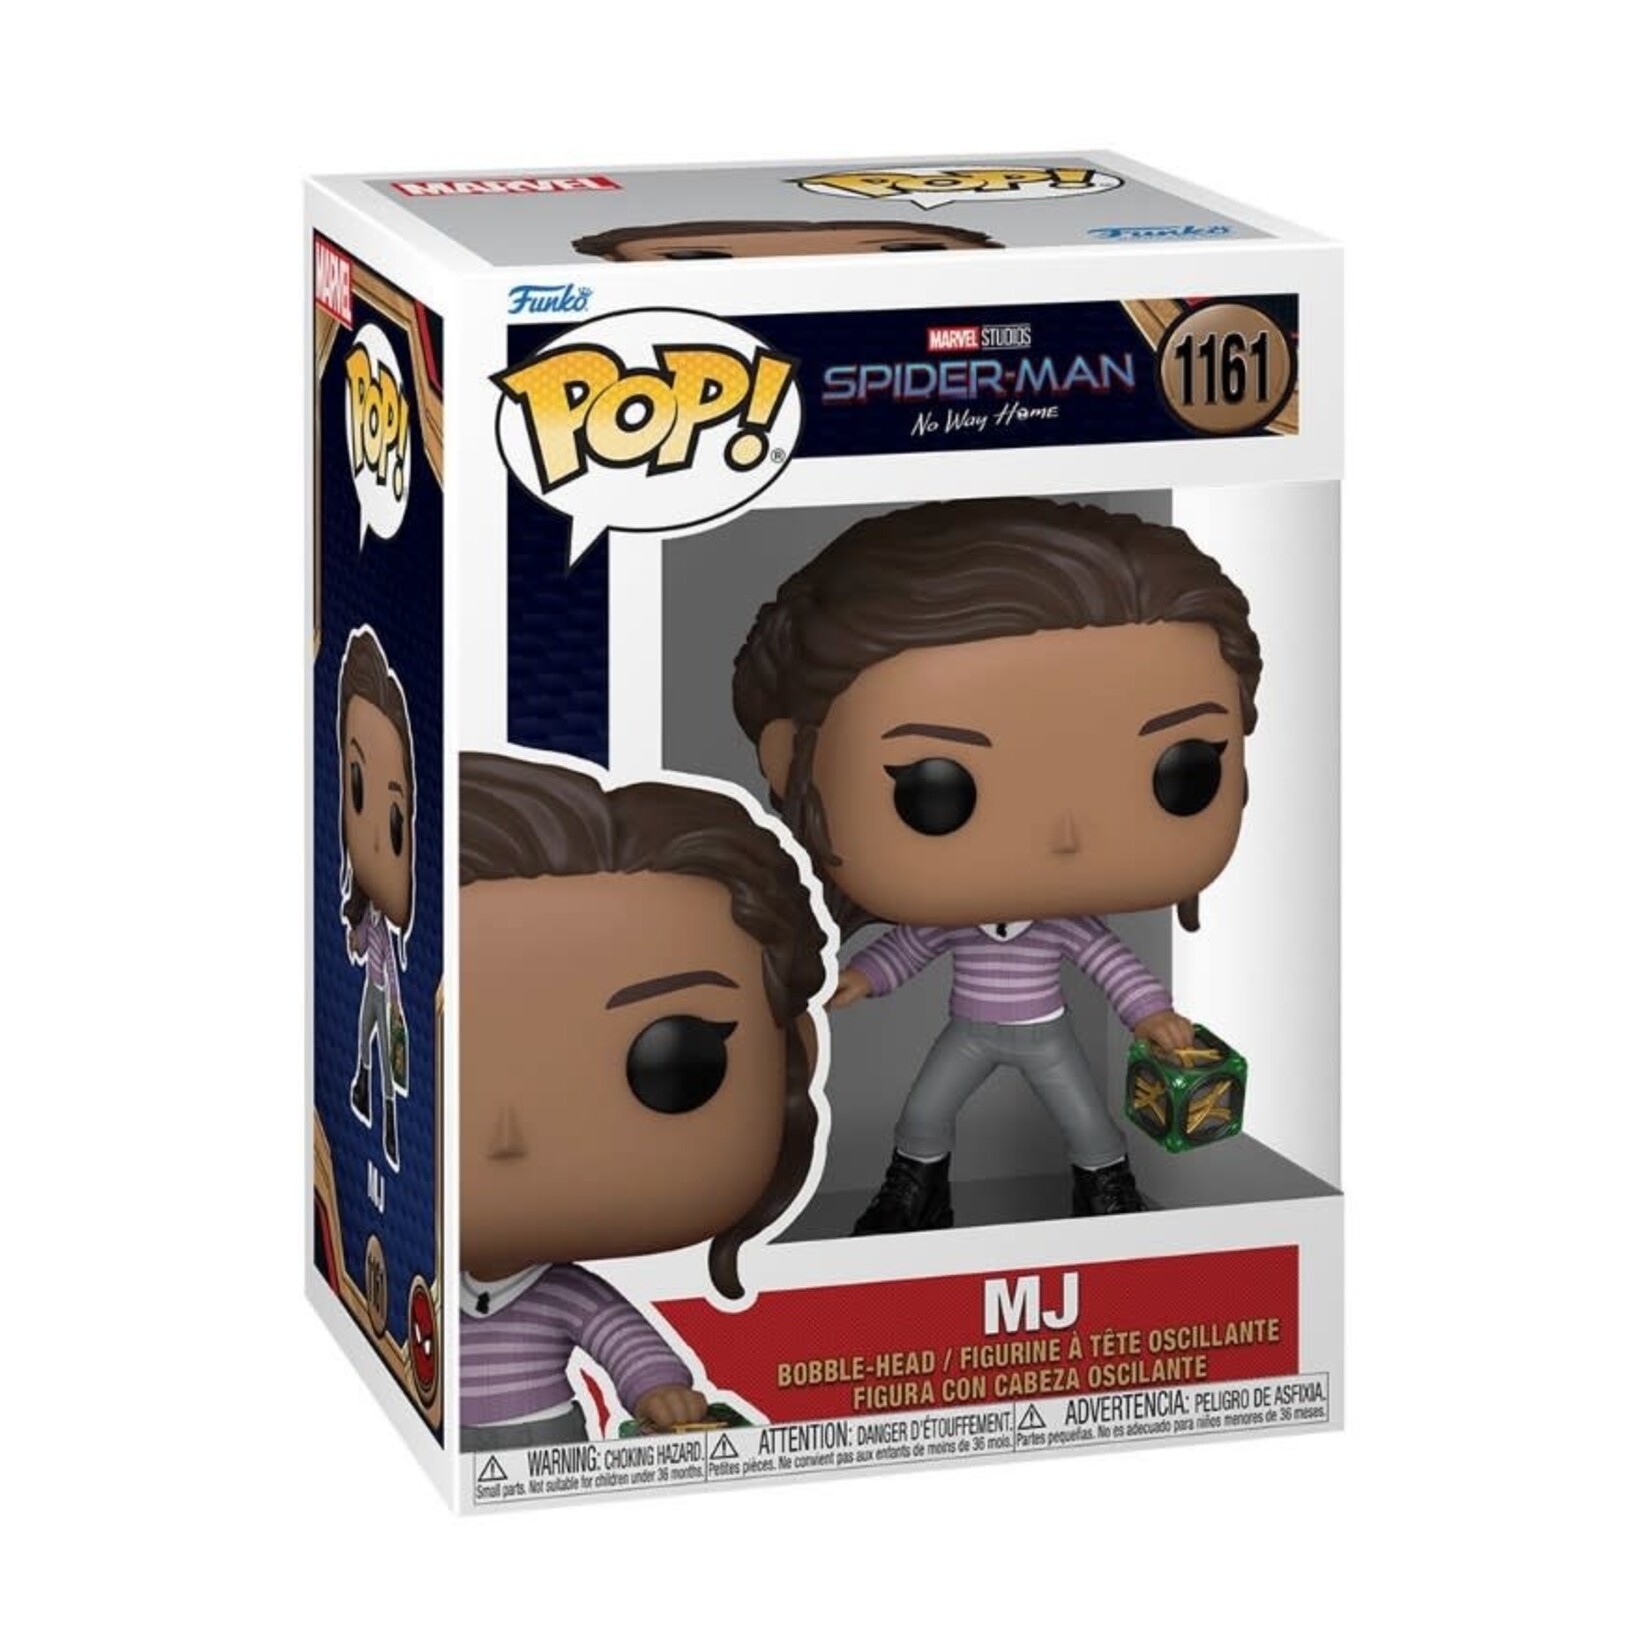 Marvel Spider-Man No Way Home Pop! - MJ With Box